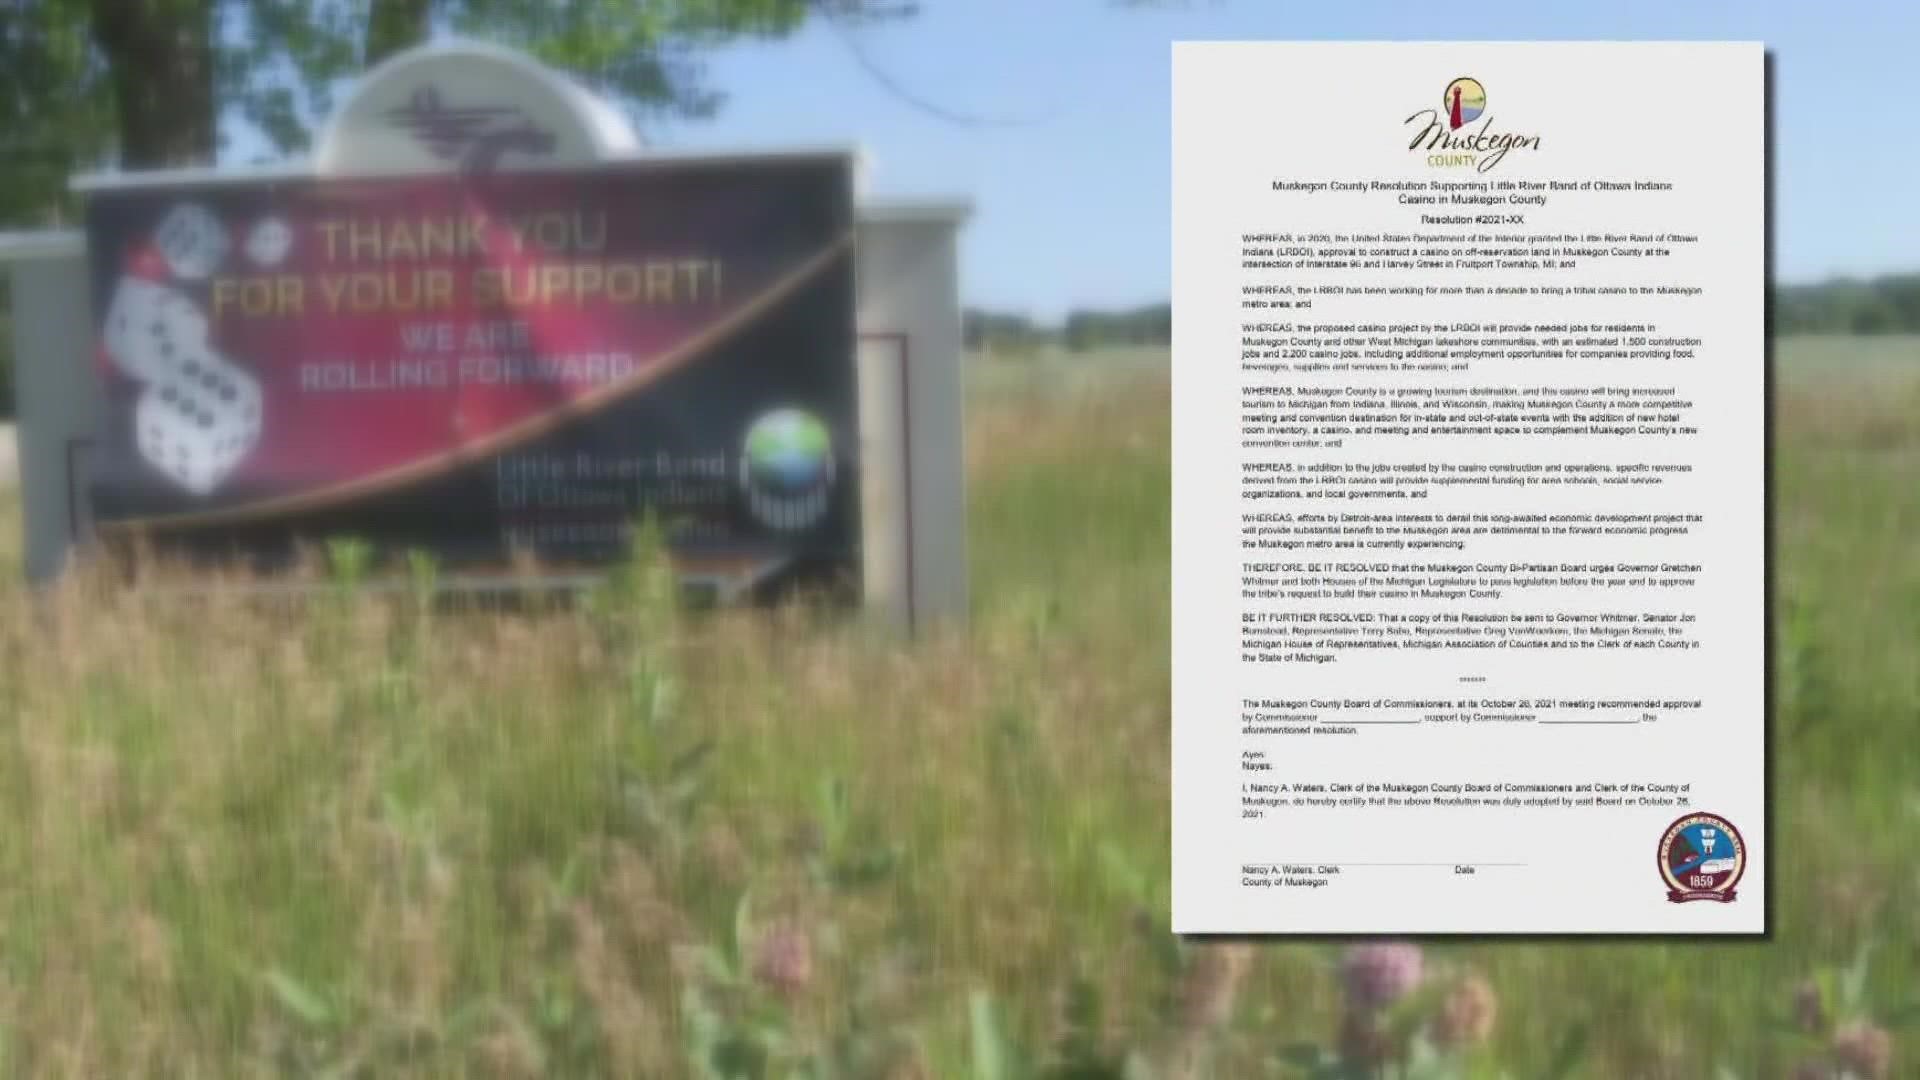 A tribe's effort to build a casino in Muskegon County is running out time.